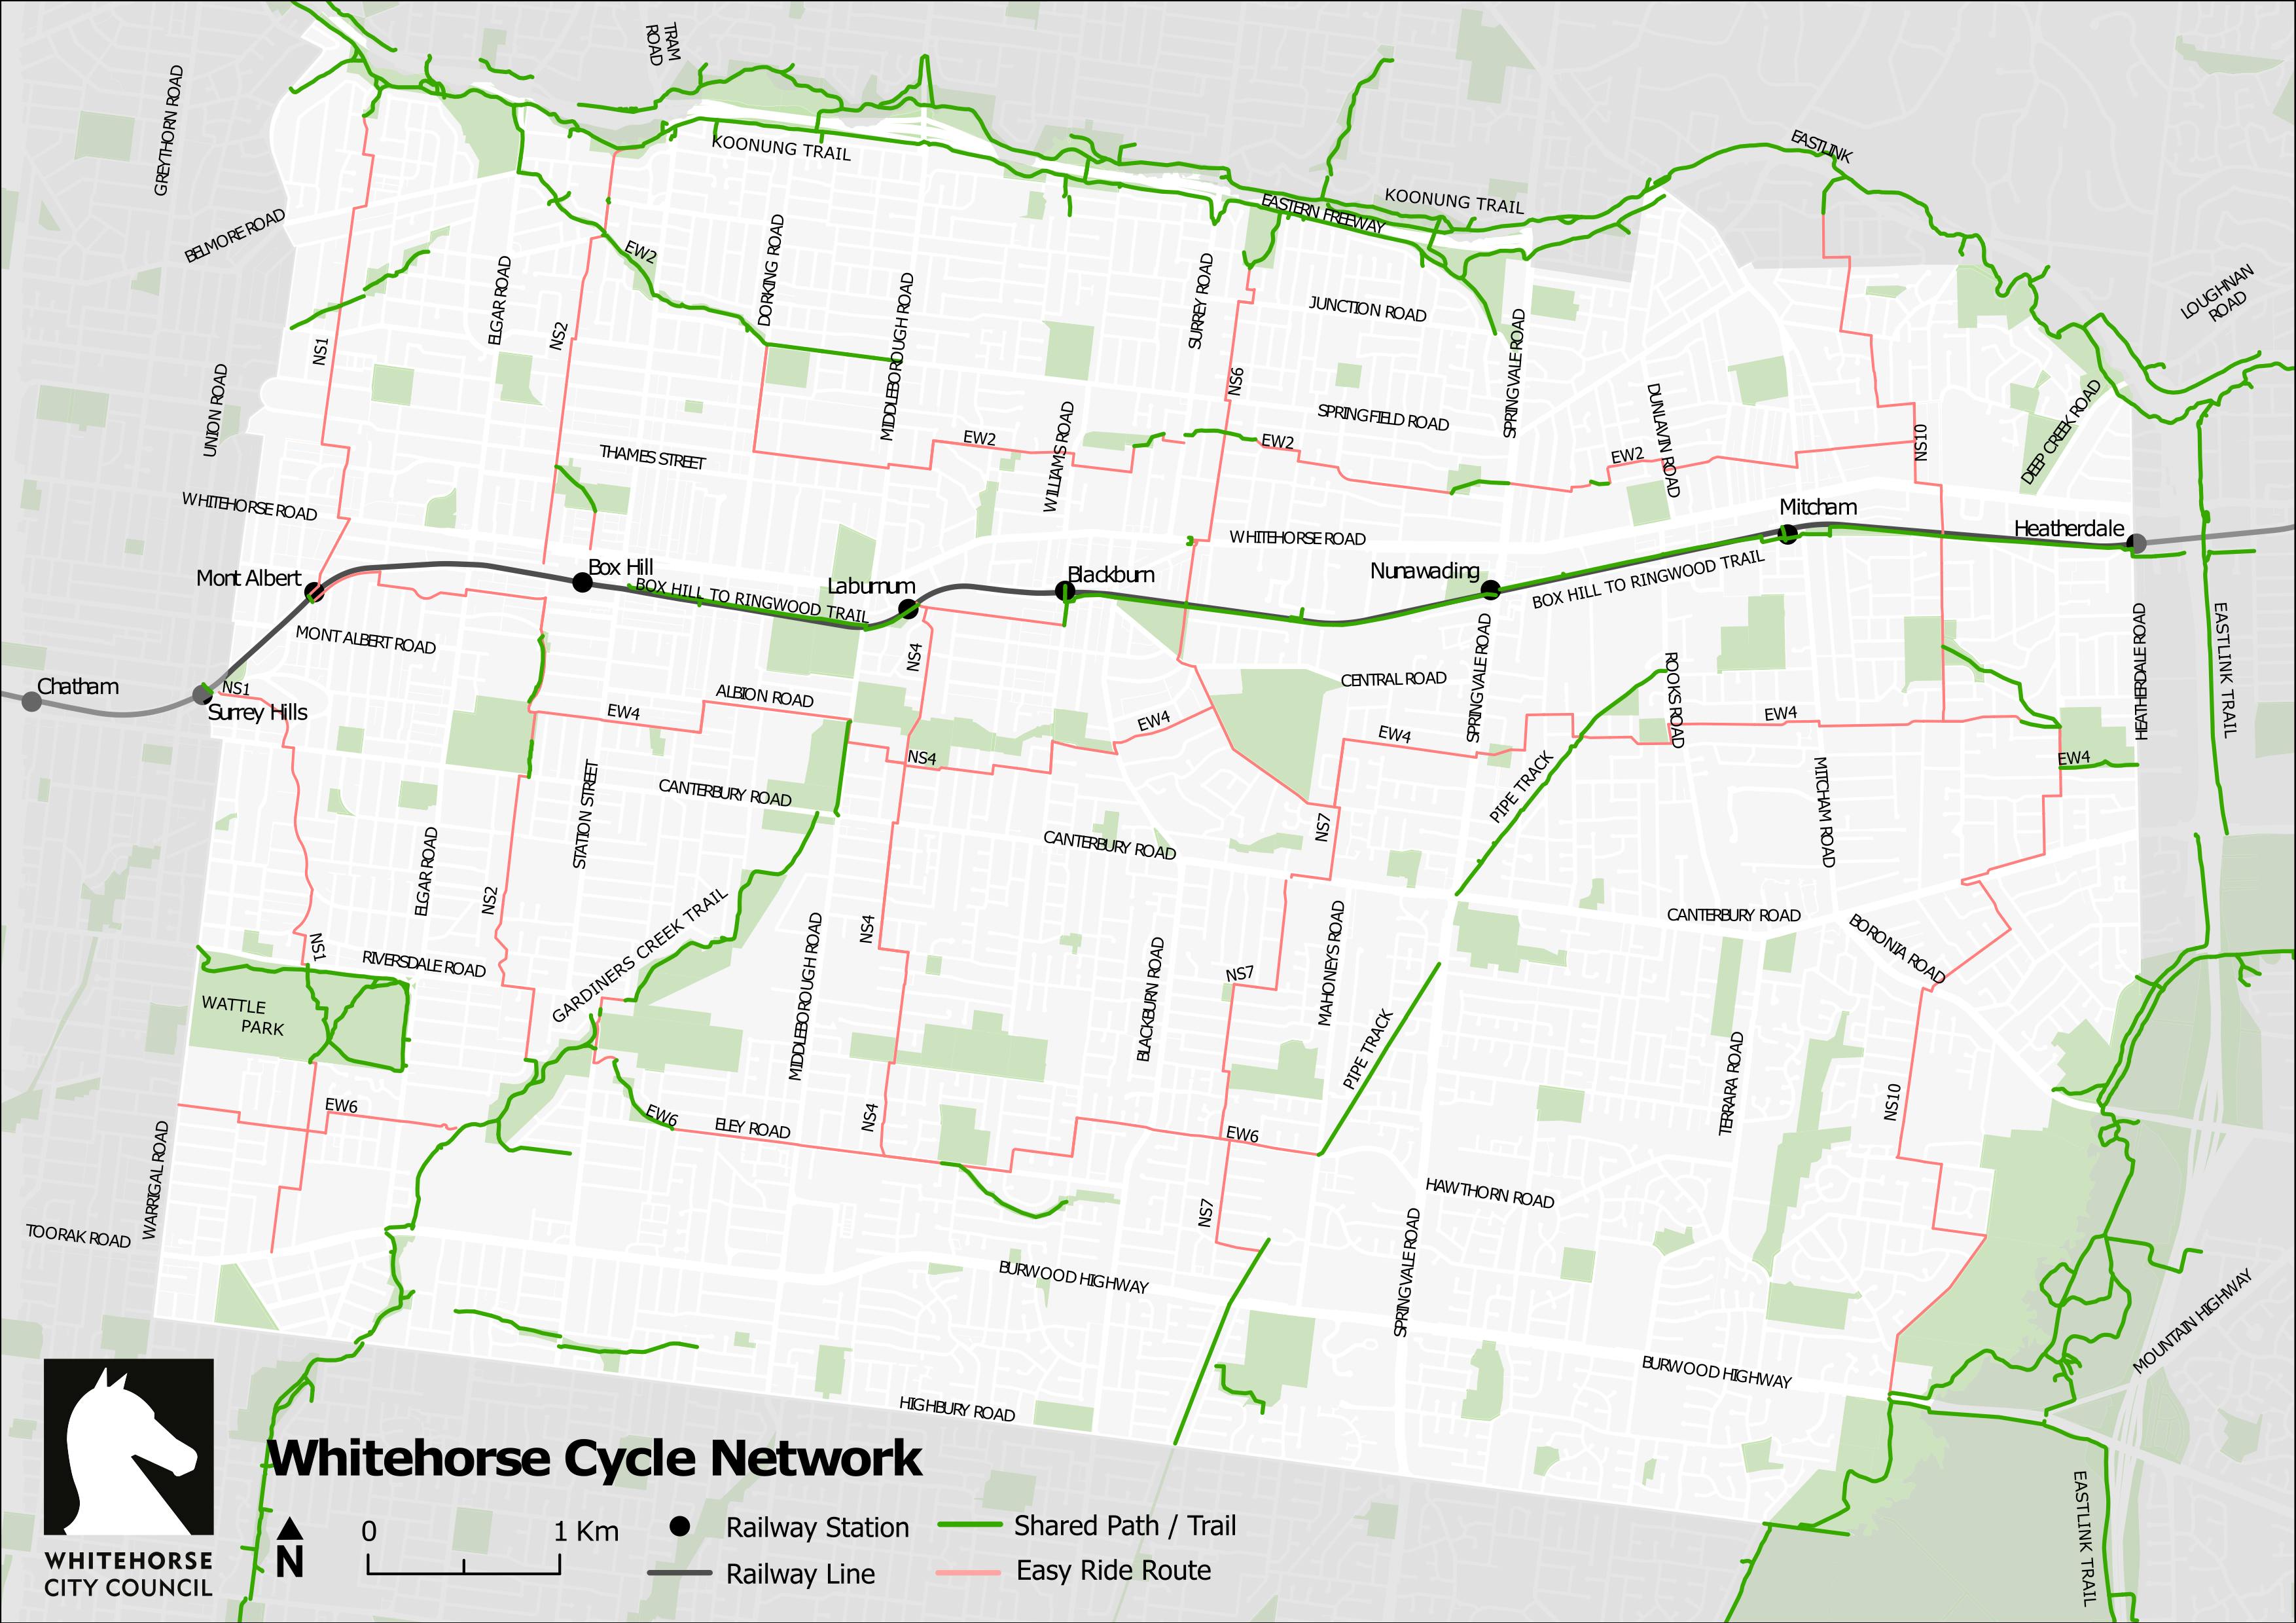 Whitehorse Cycle Network